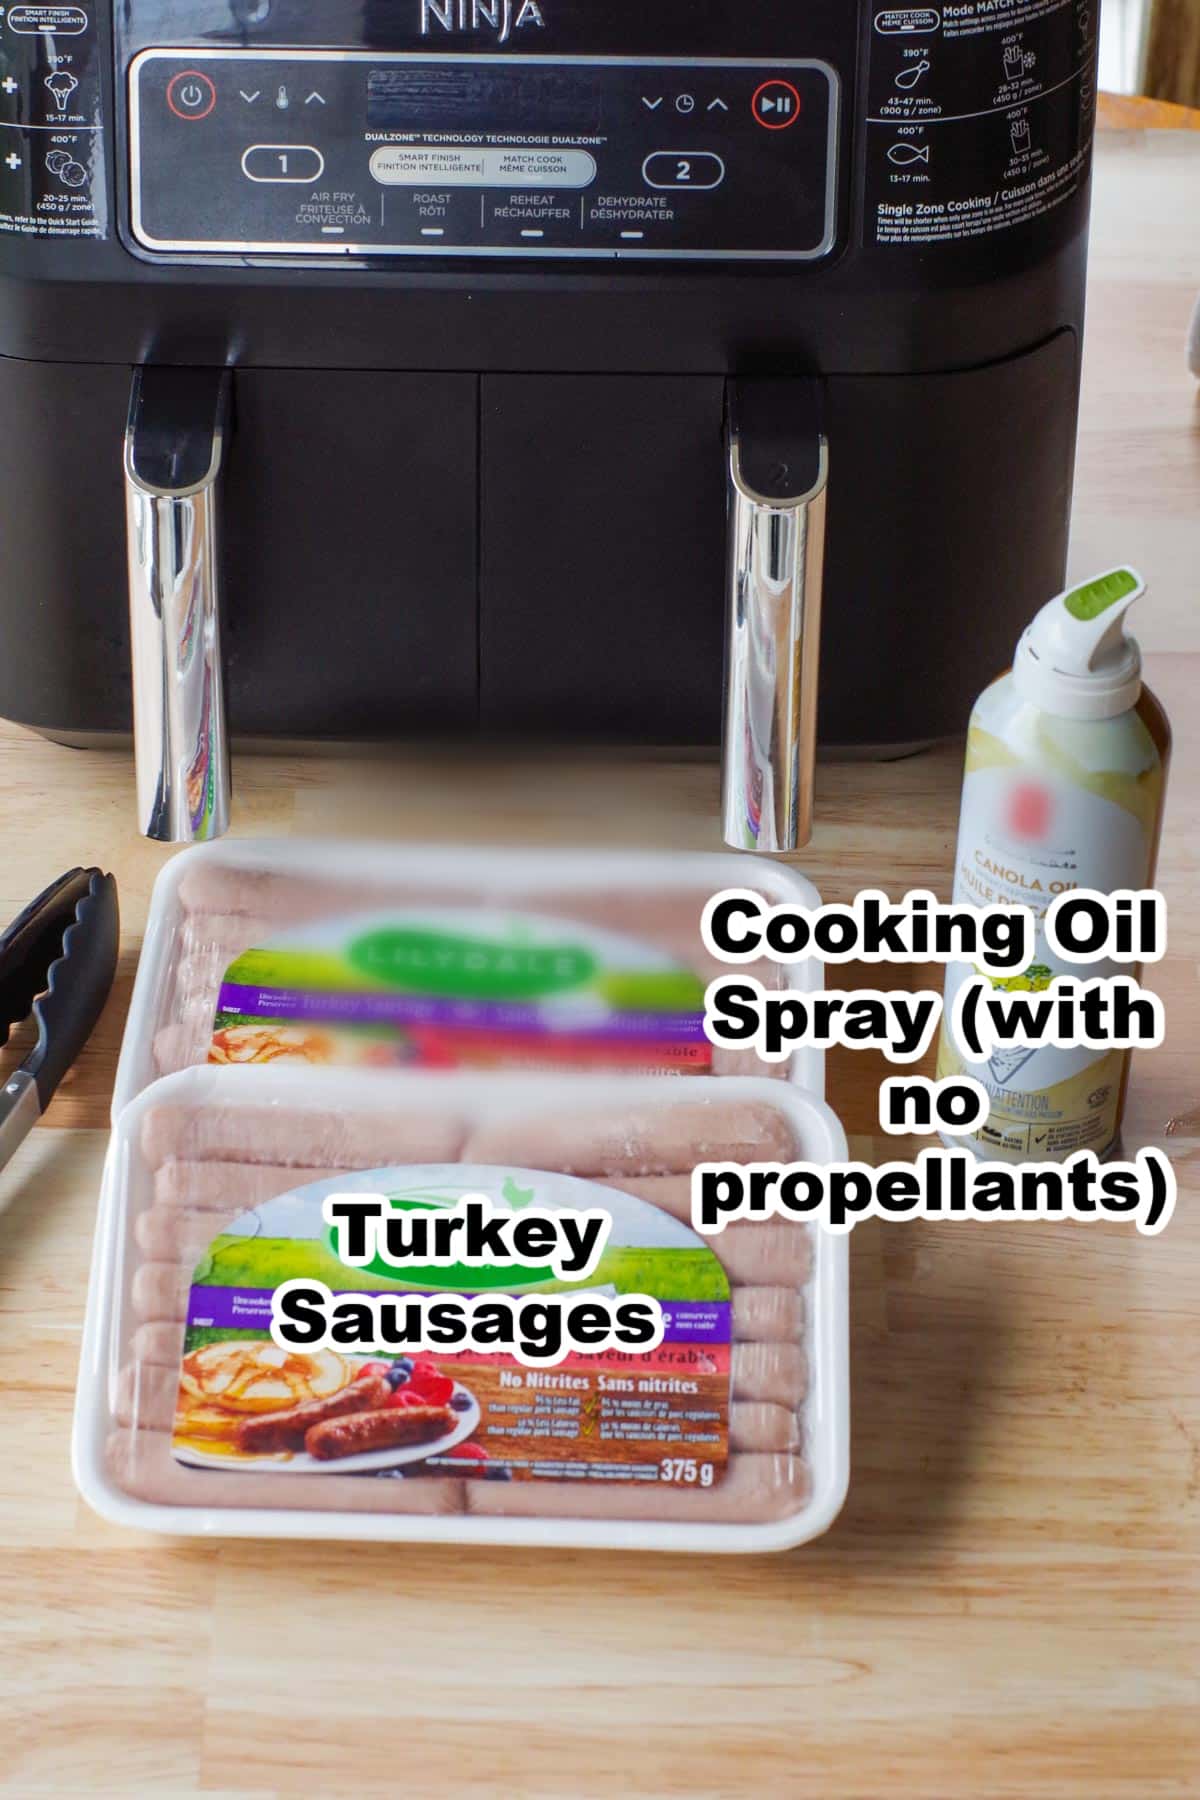 2 packages of turkey sausages and spray oil in front of an air fryer